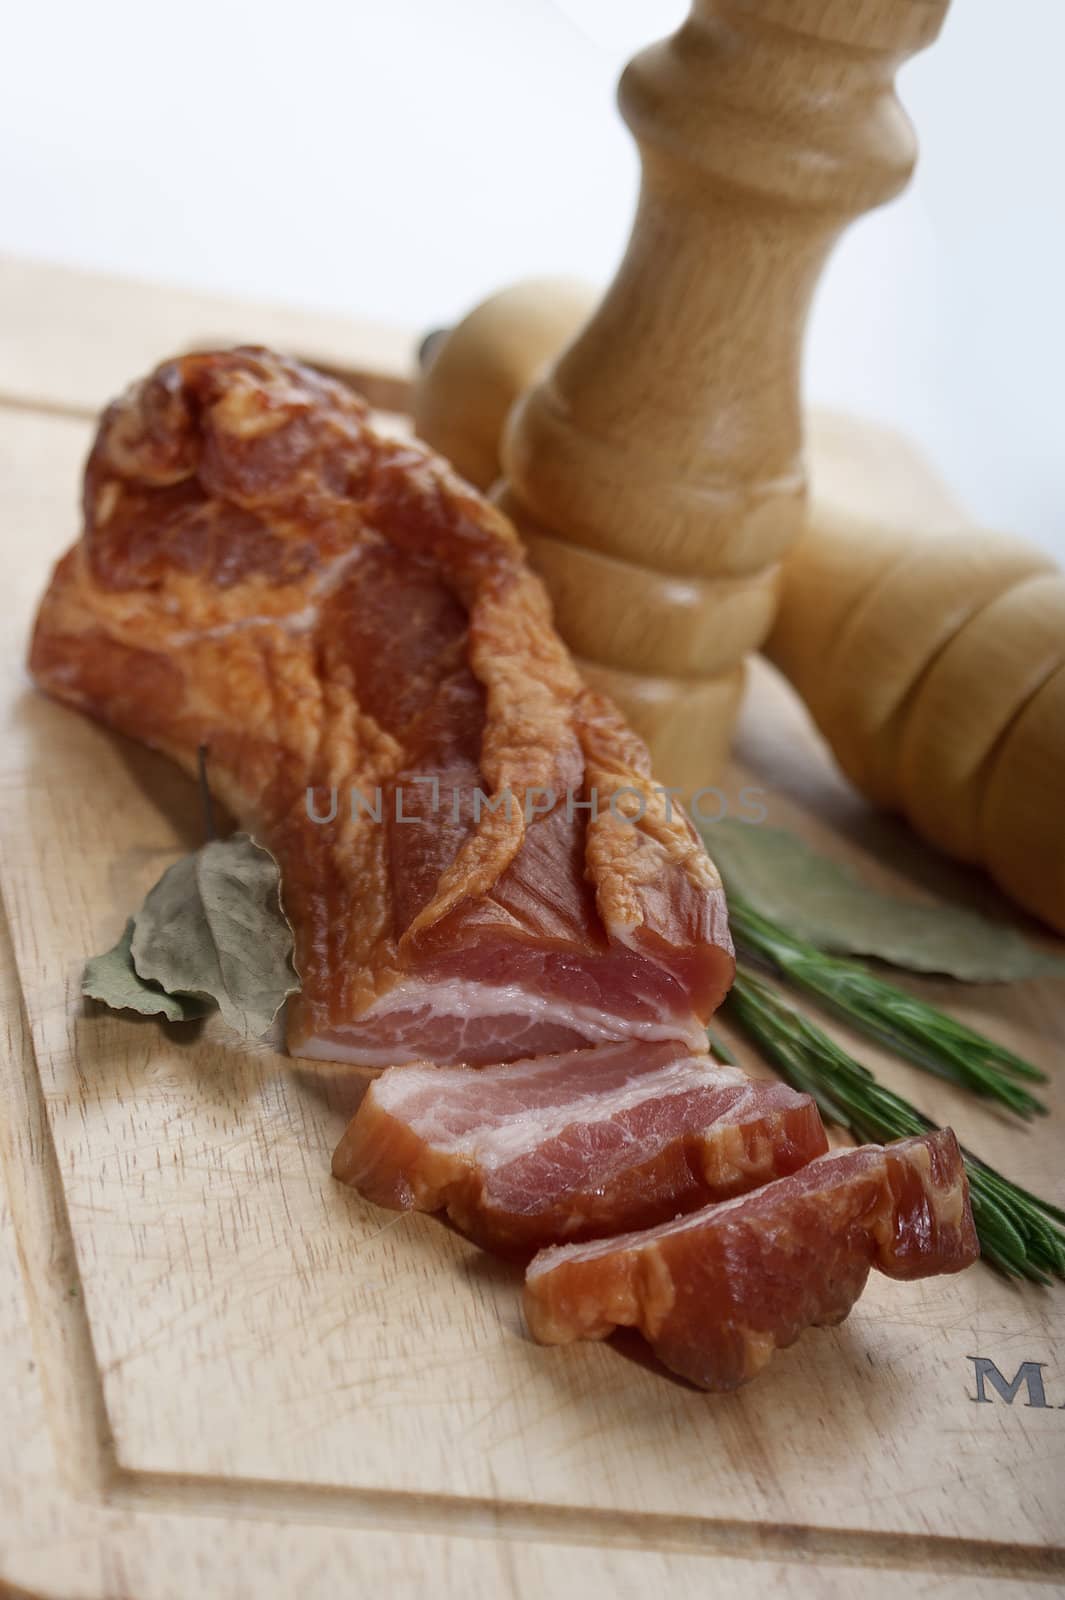 Pieces of bacon with herbs on the wooden board